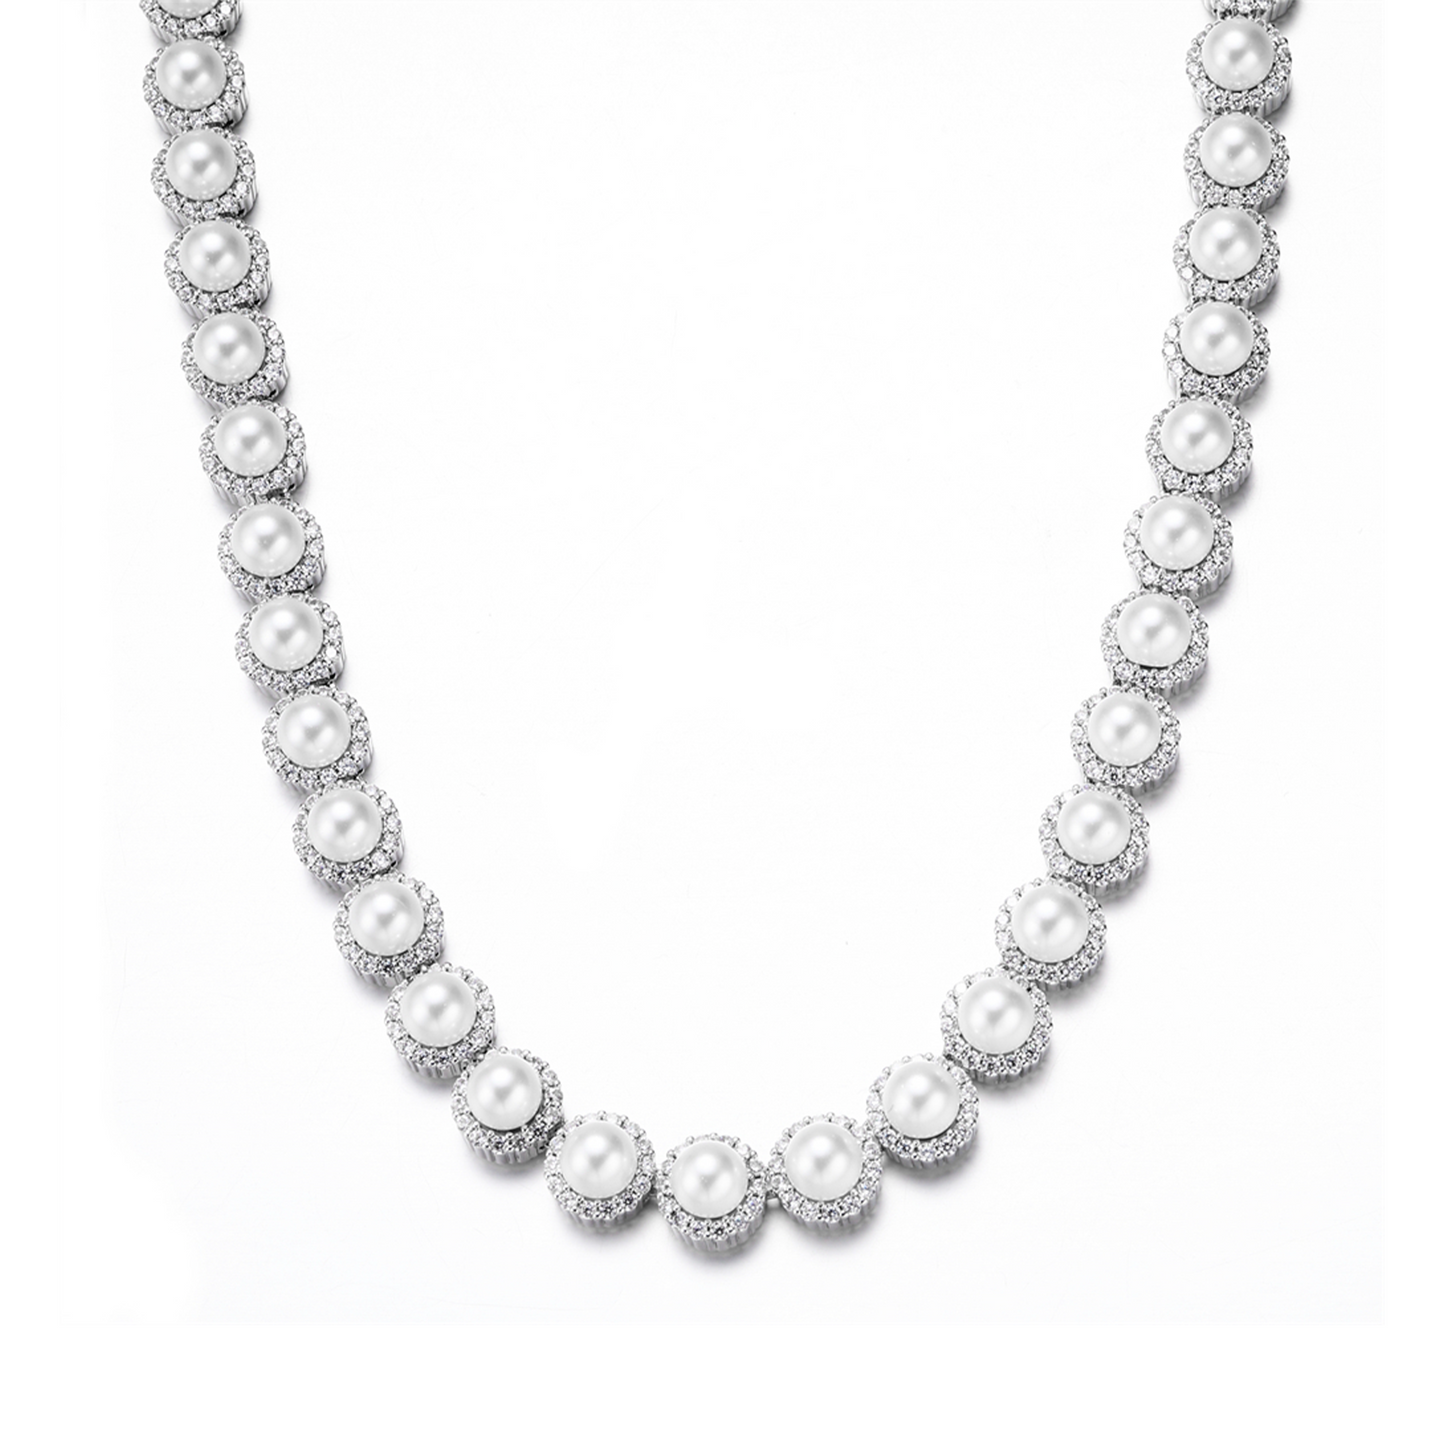 Clustered Pearl Chain in White Gold